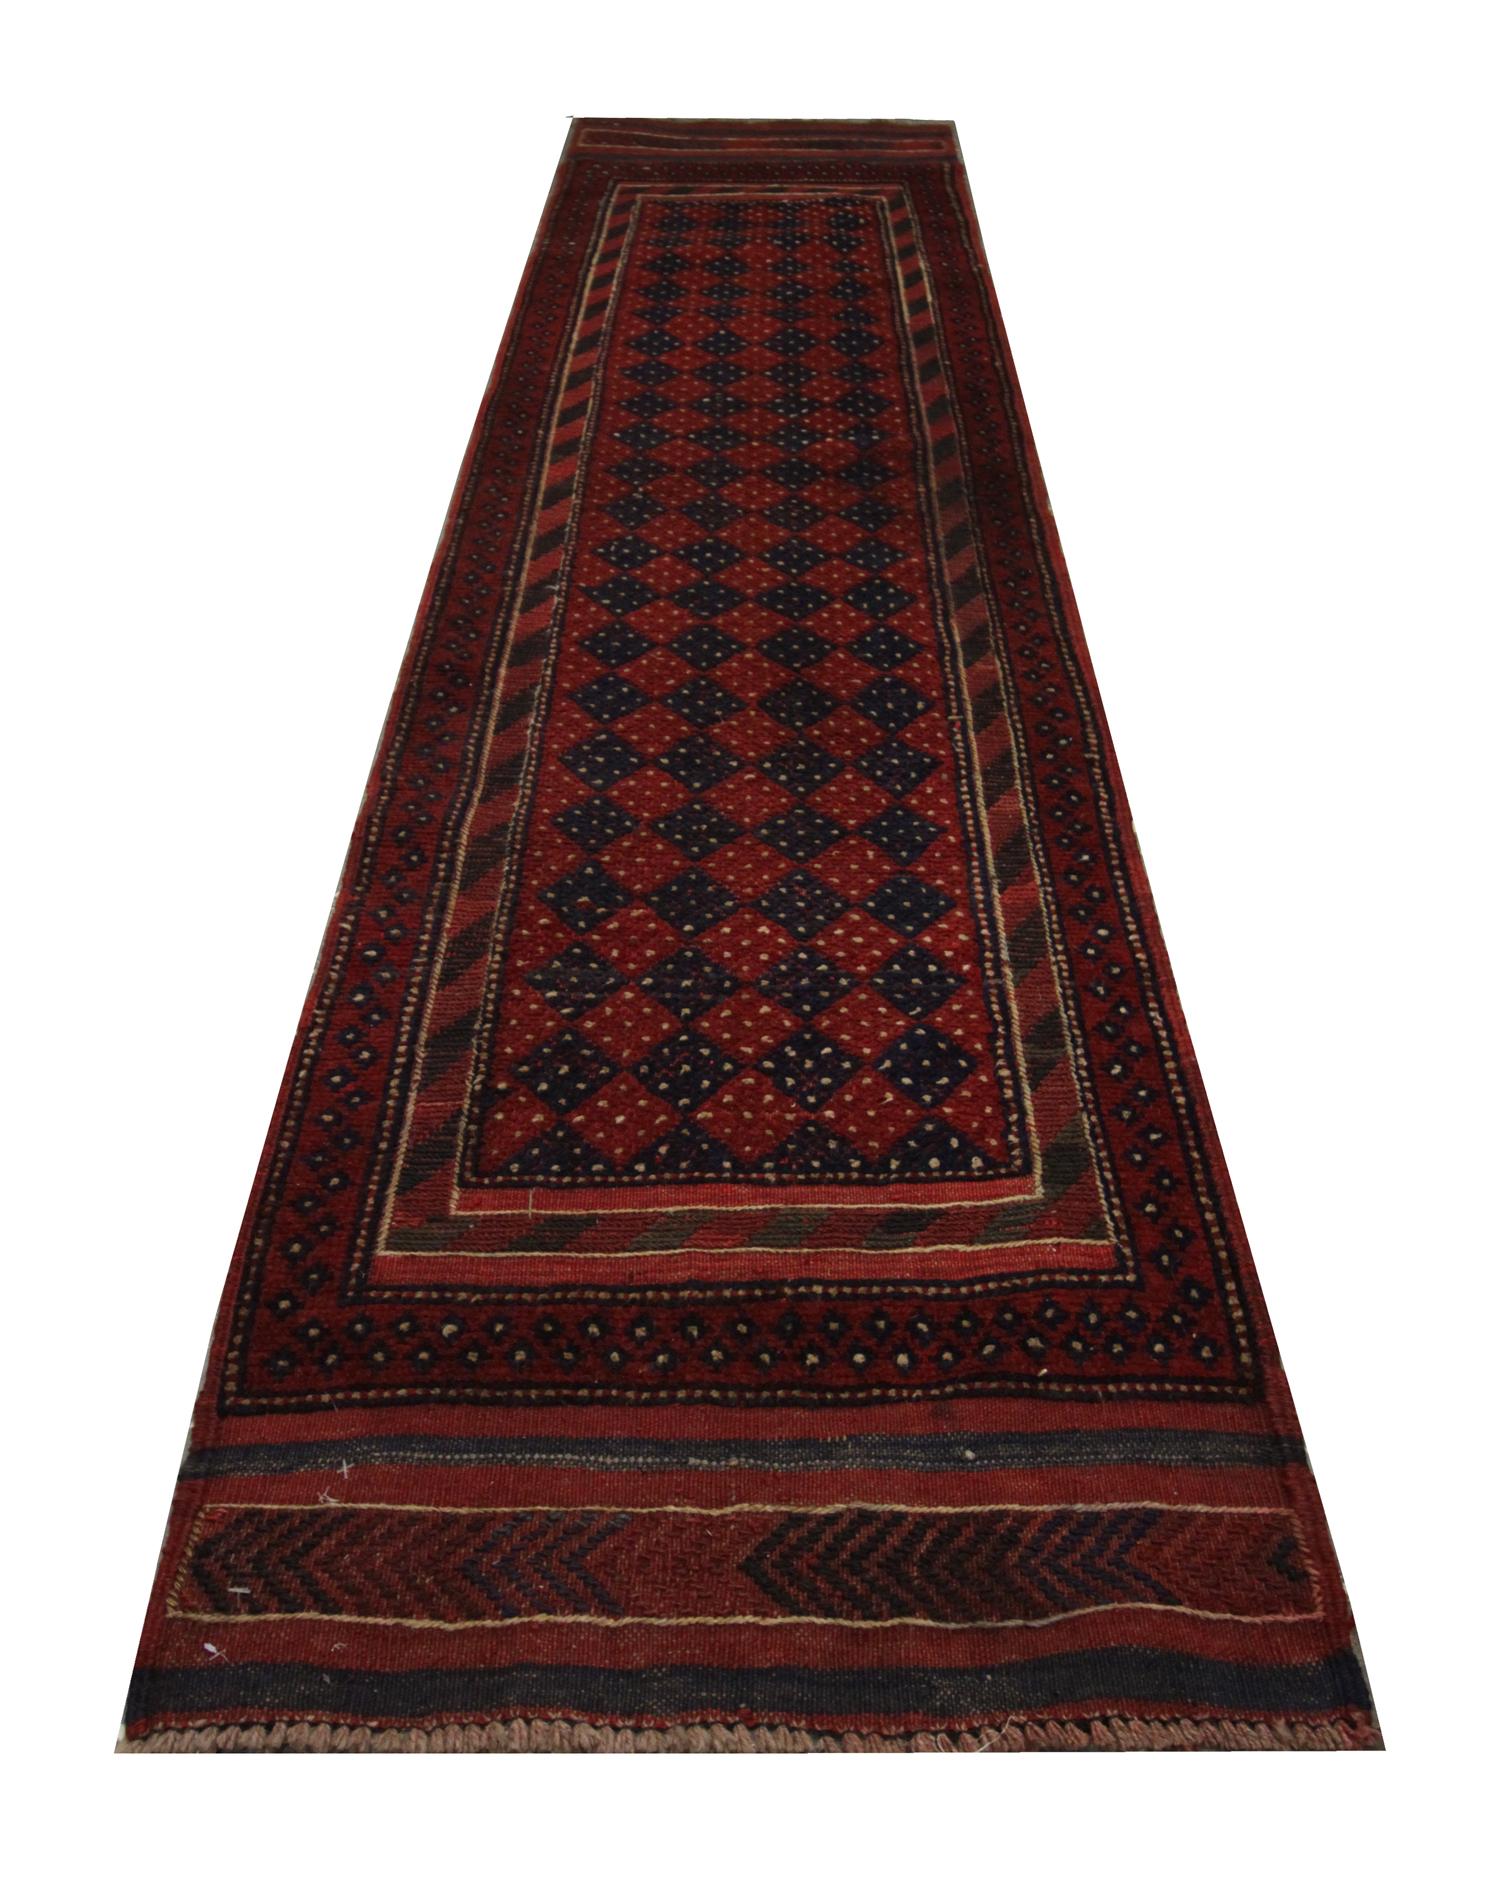 This fine wool runner rug features a bold design with deep red background with a geometric design covering the centre. A layered border has then framed this. 
The colour and design in this elegant piece make it the perfect accent accessory for any